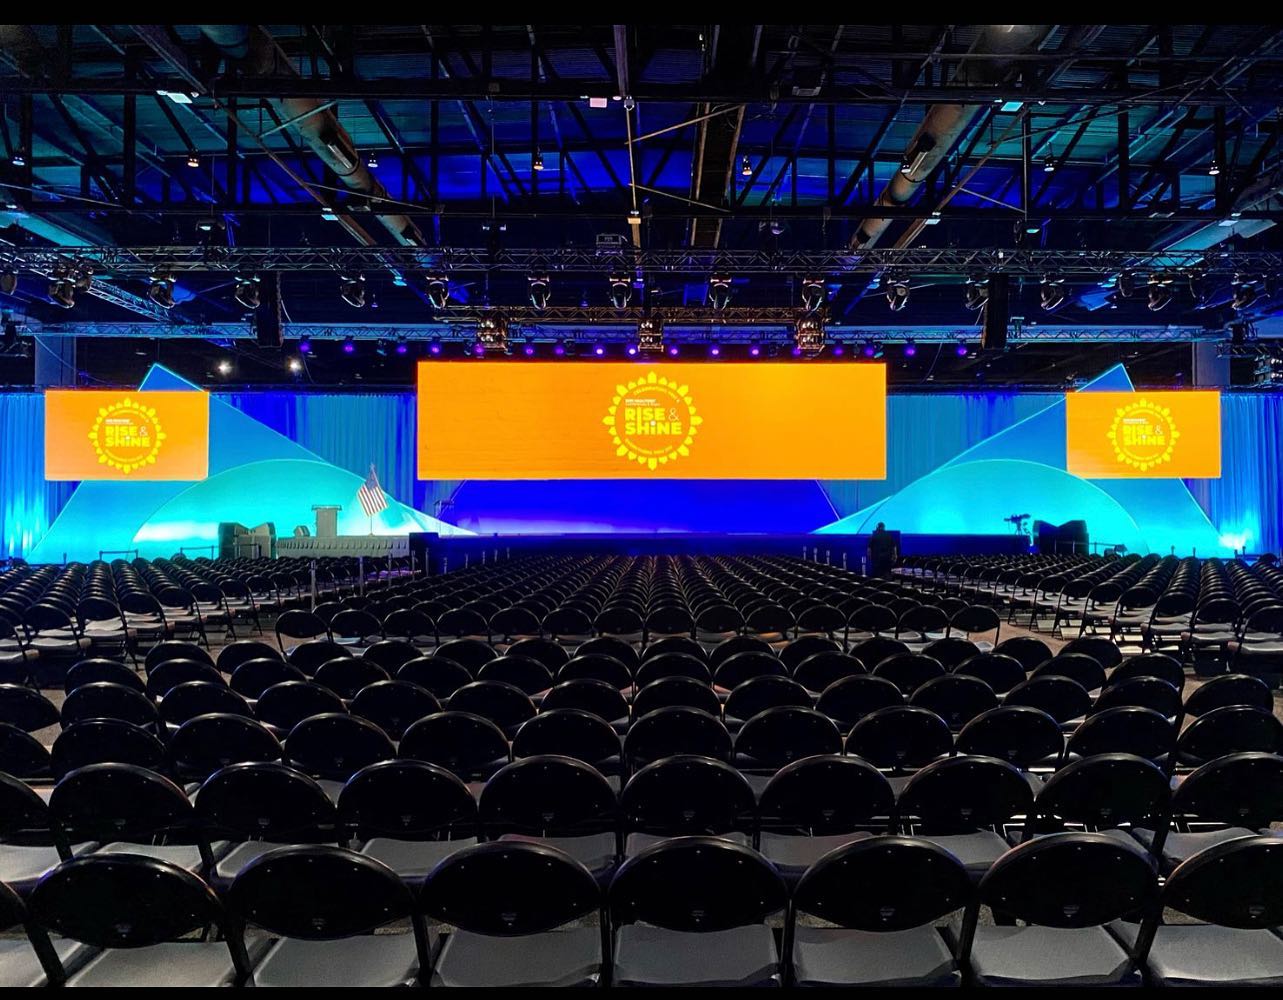 A view of a conference room being prepared, with a vividly colored widescreen at the front and rows of empty chairs arranged for attendees.